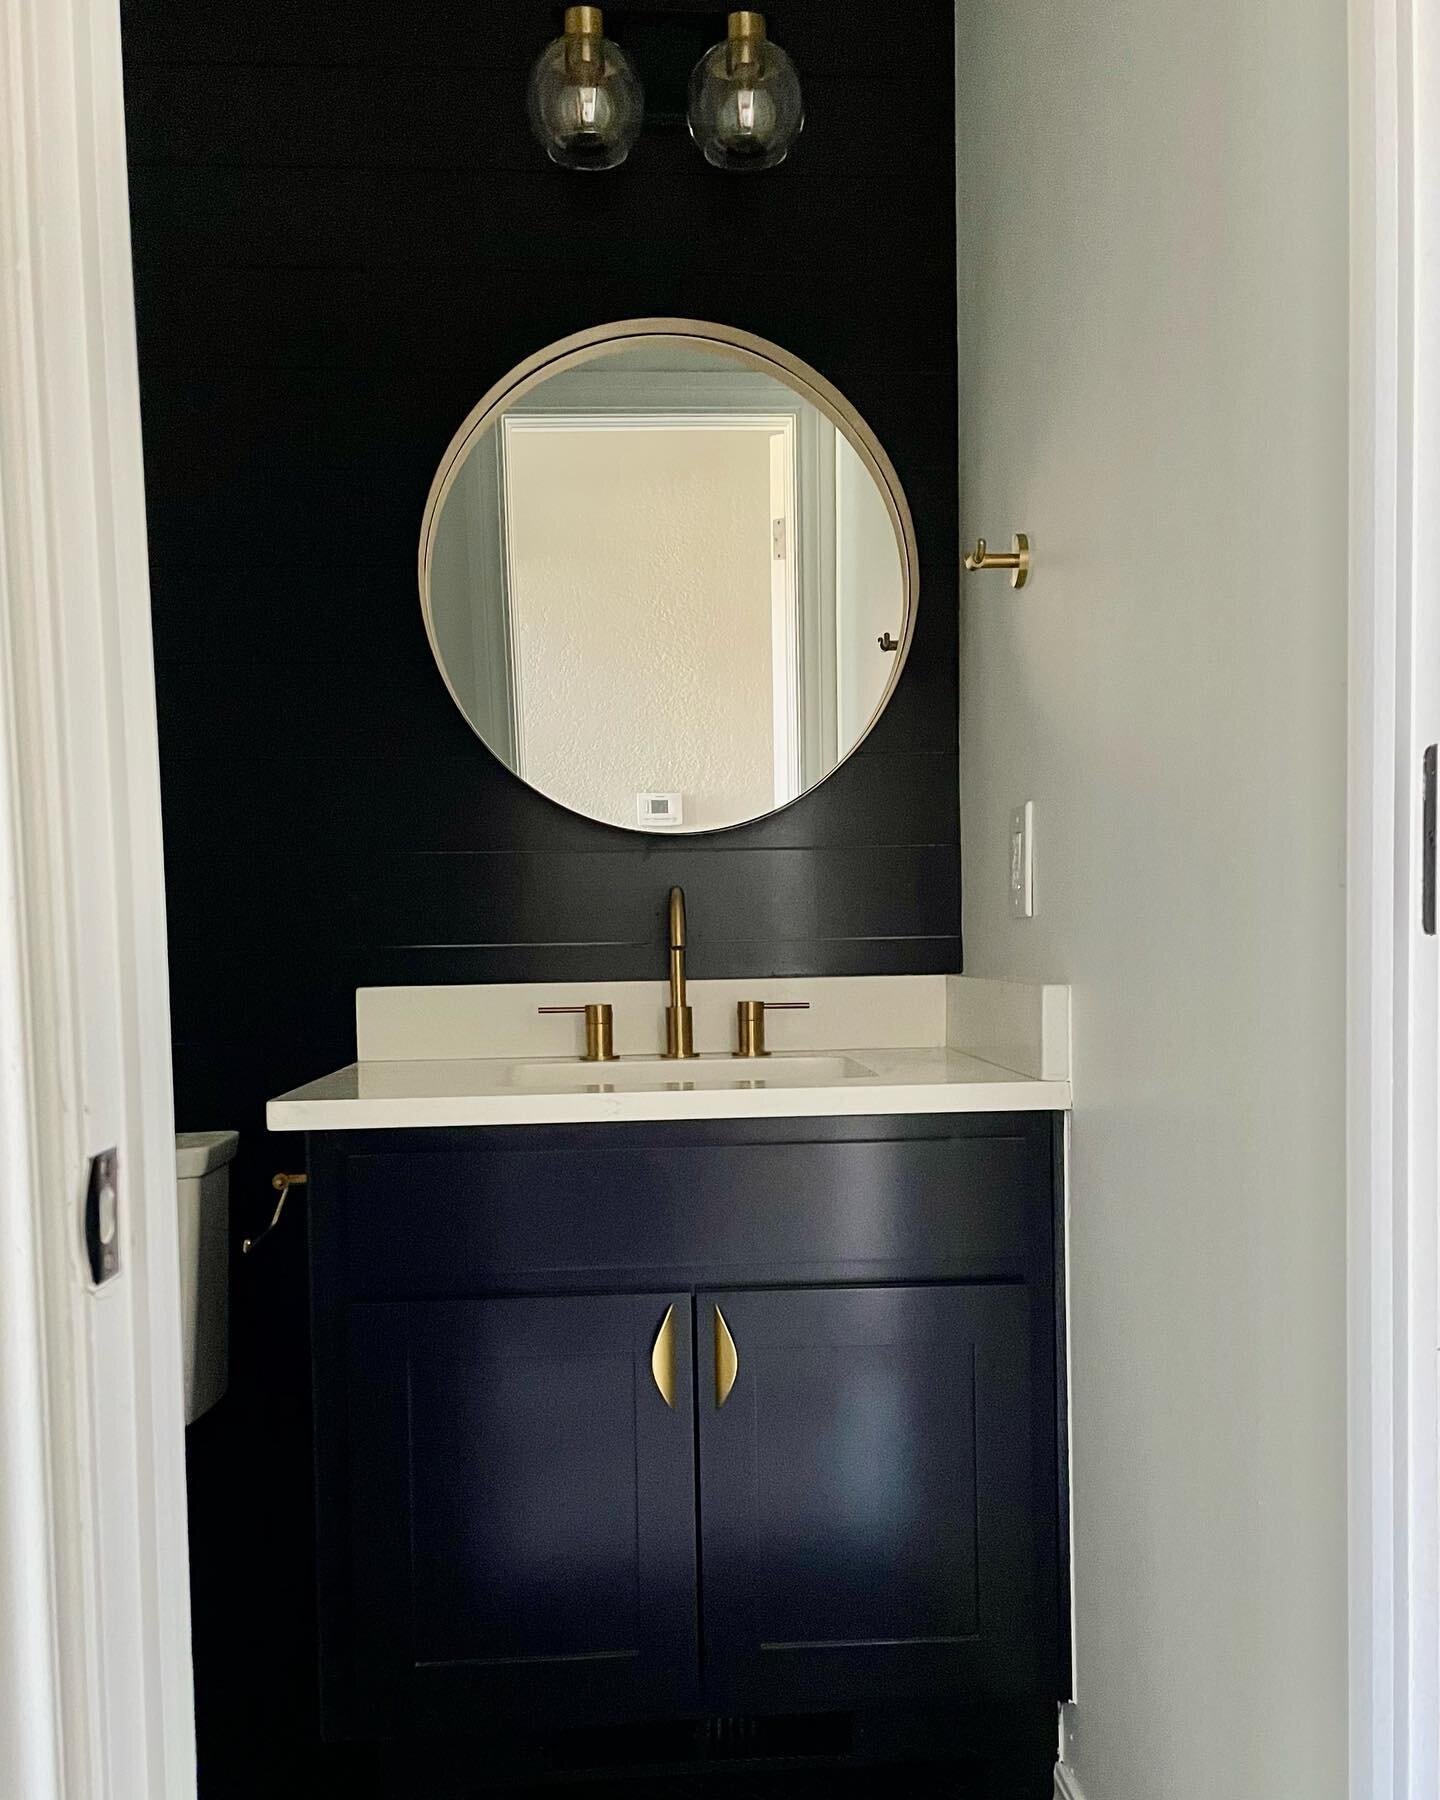 Powder bath makeover!
The only thing we reused was the shell of the vanity. 
Swipe for before 🙈
-
-
-
#gaytancontracting #contractor #homerenovation #homeremodel #remodels #okhomes #homesofokc #okcrenovation #homebeautiful #interiordesign #modernhou